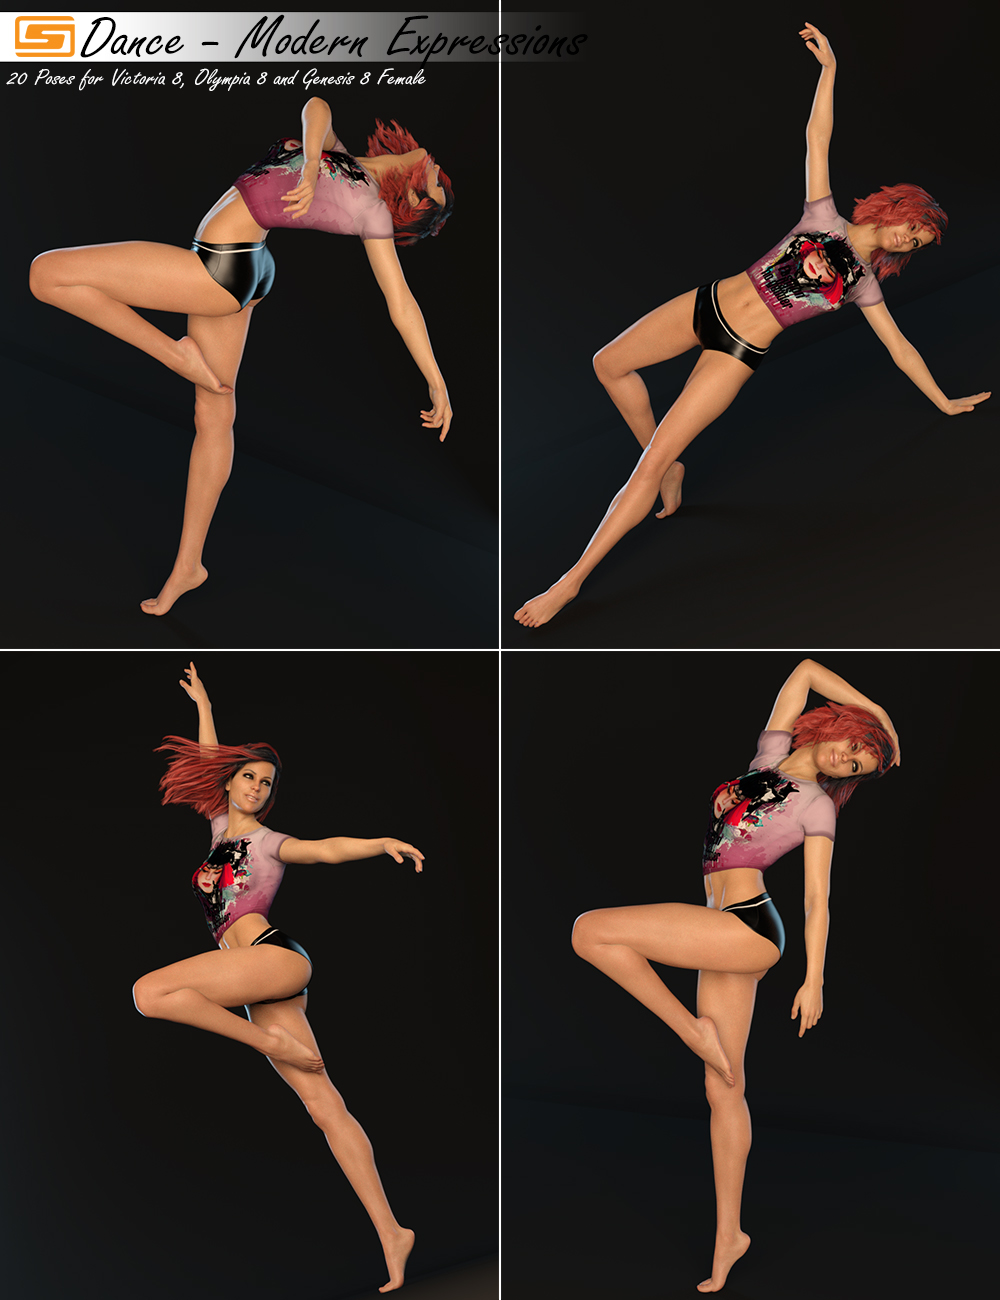 Dance - Modern Expression - Poses for Genesis 8 Female(s) by: Sedor, 3D Models by Daz 3D